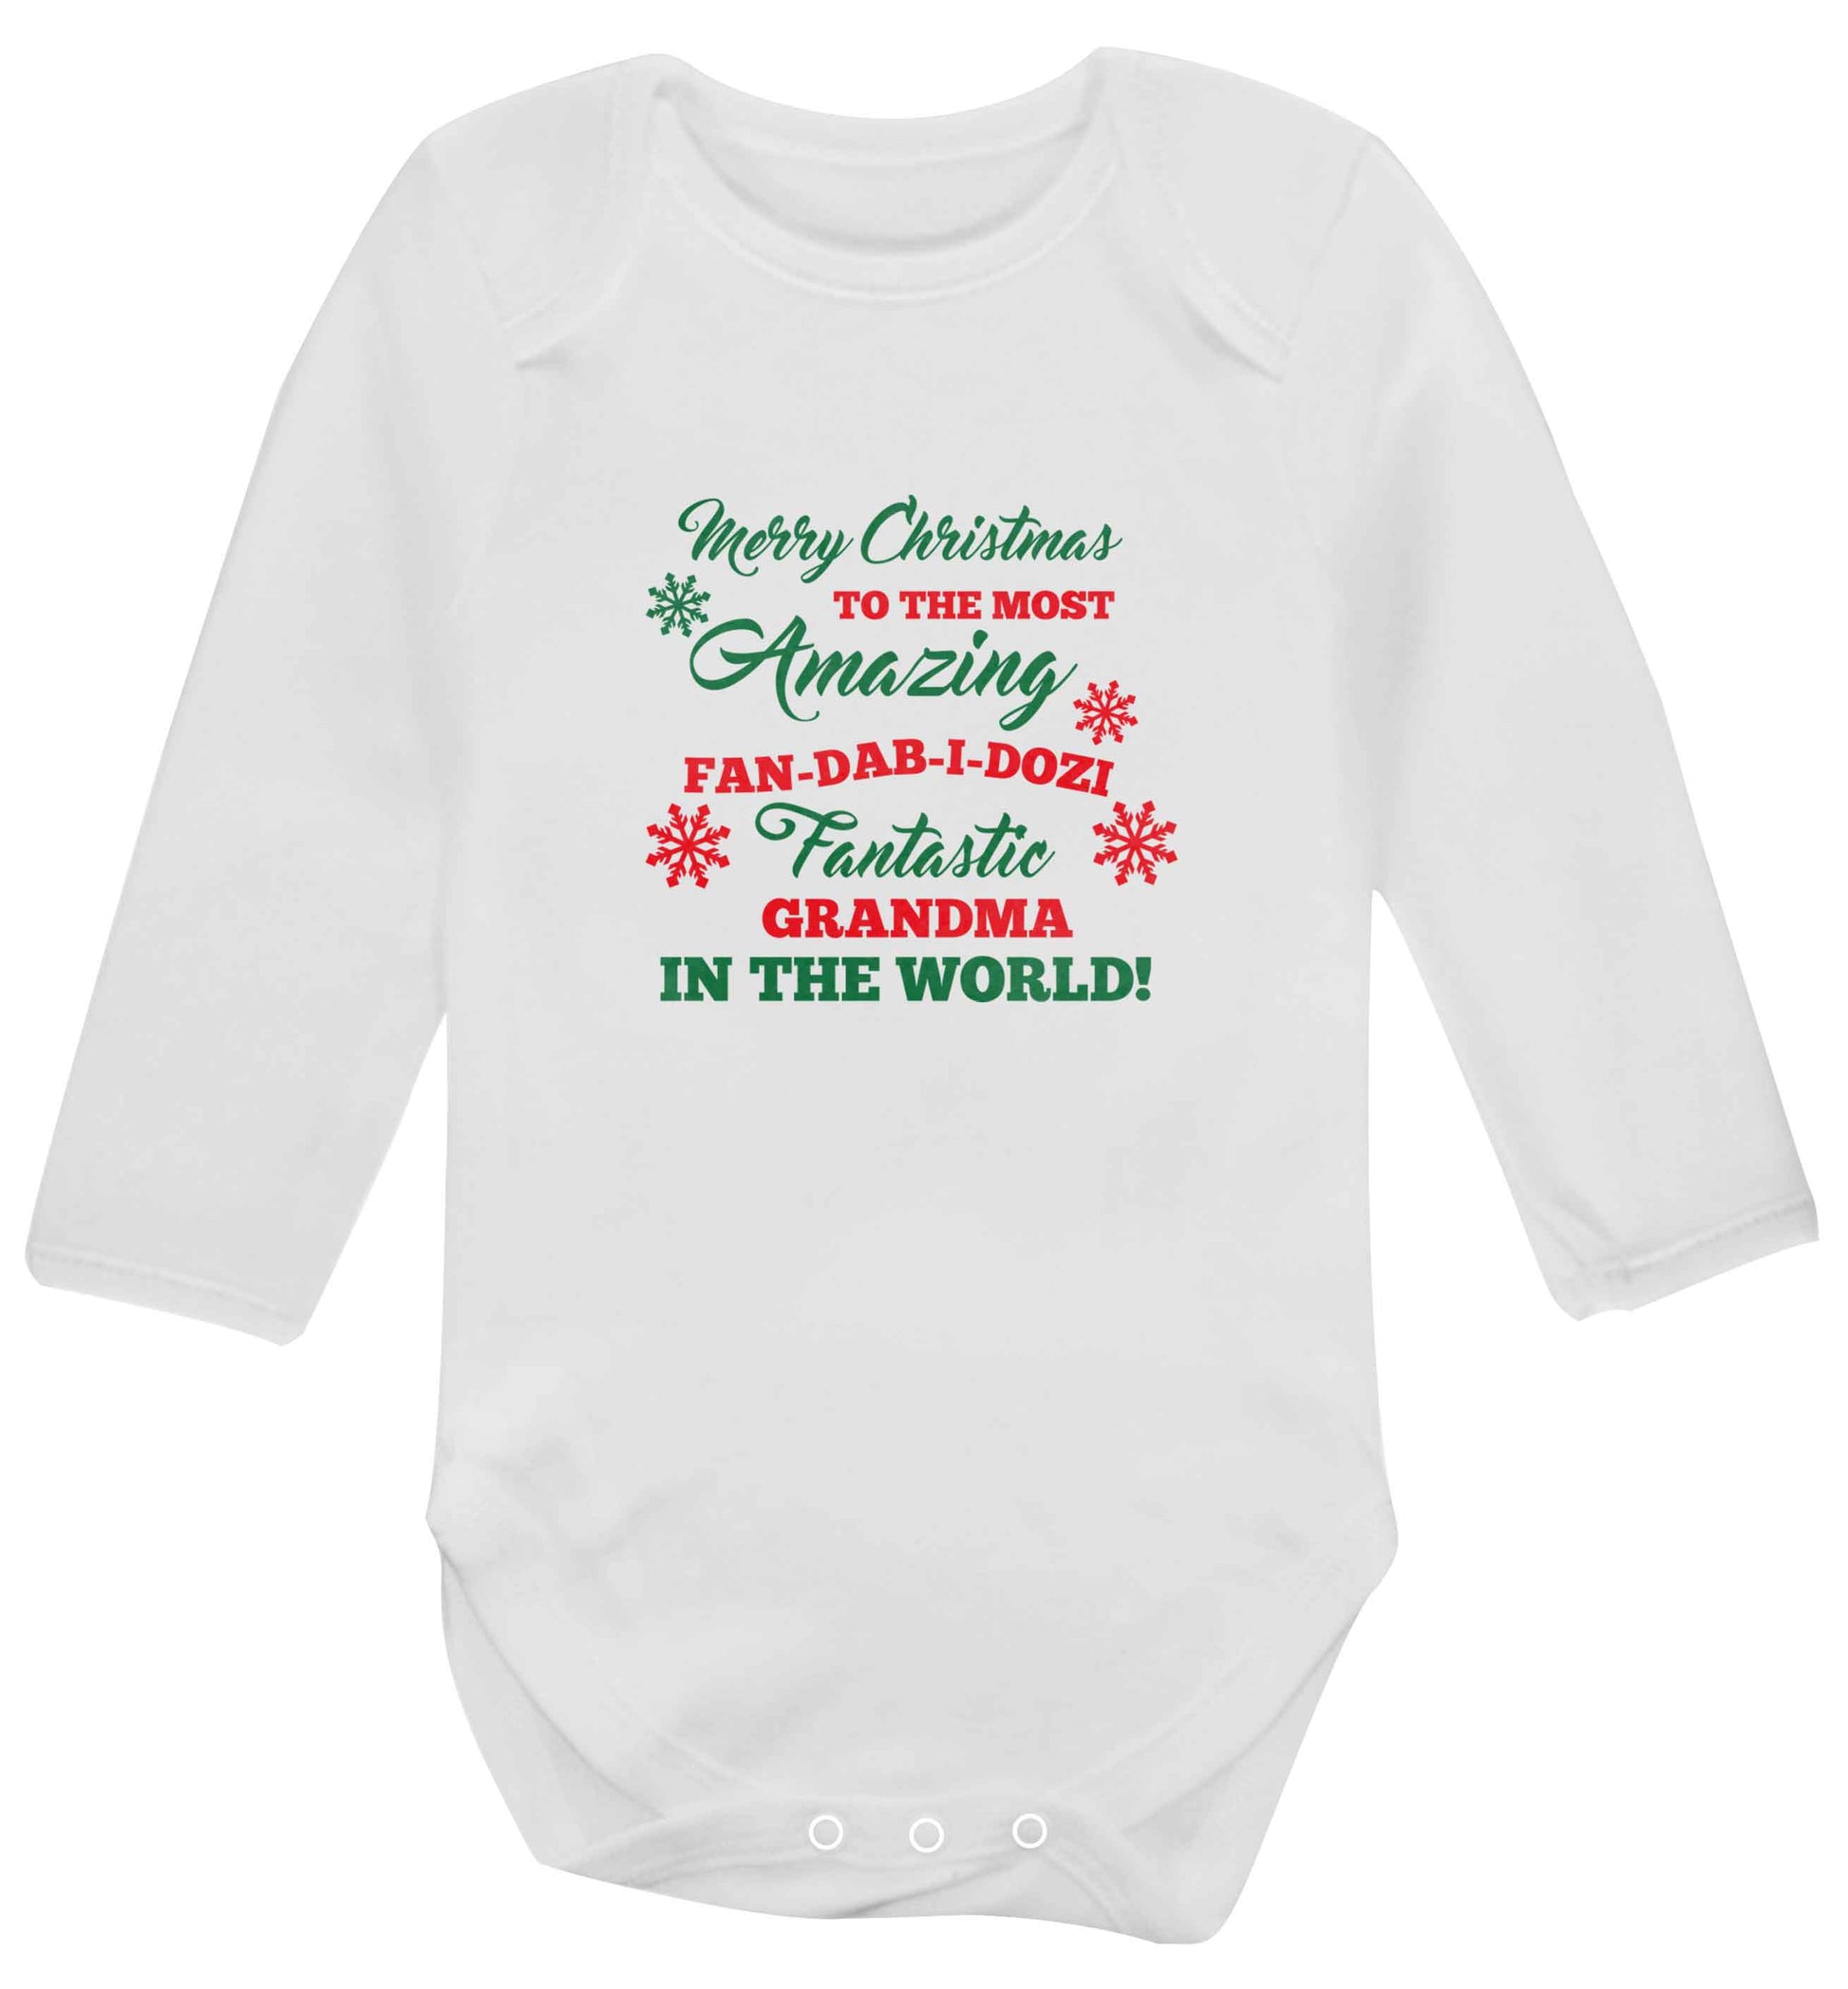 Merry Christmas to the most amazing fan-dab-i-dozi fantasic Grandma in the world baby vest long sleeved white 6-12 months